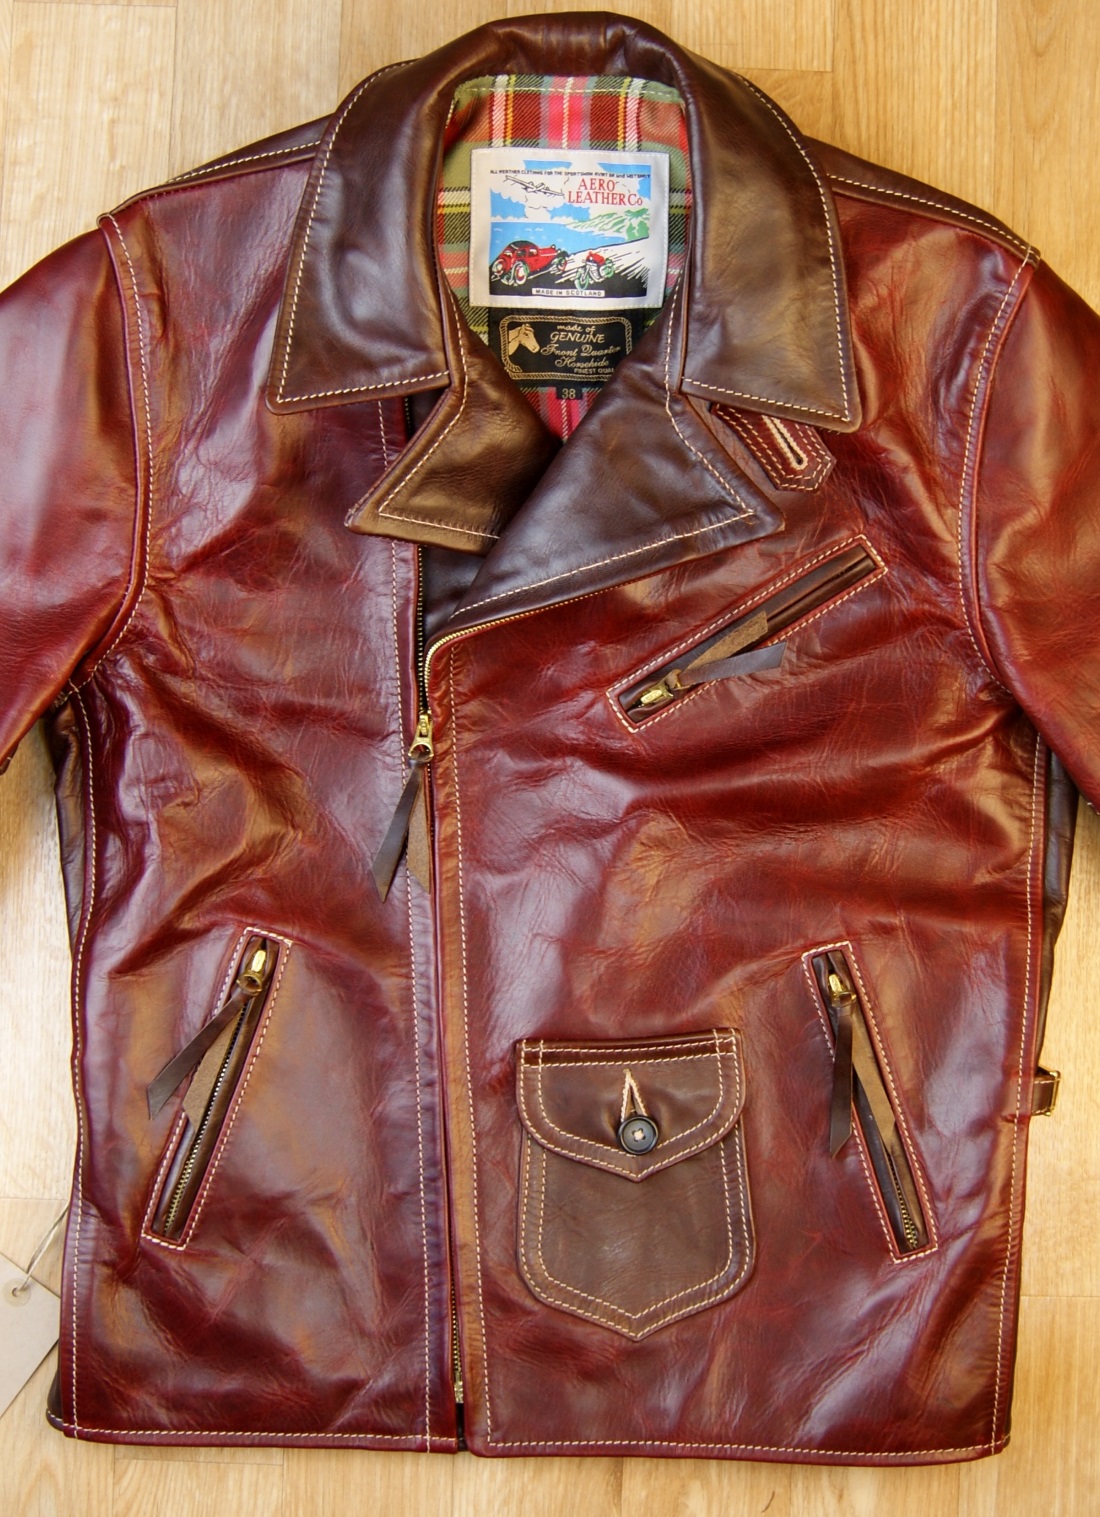 Aero STF Bootlegger Cherry and Brown CXL FQHH Two-Tone front.jpg